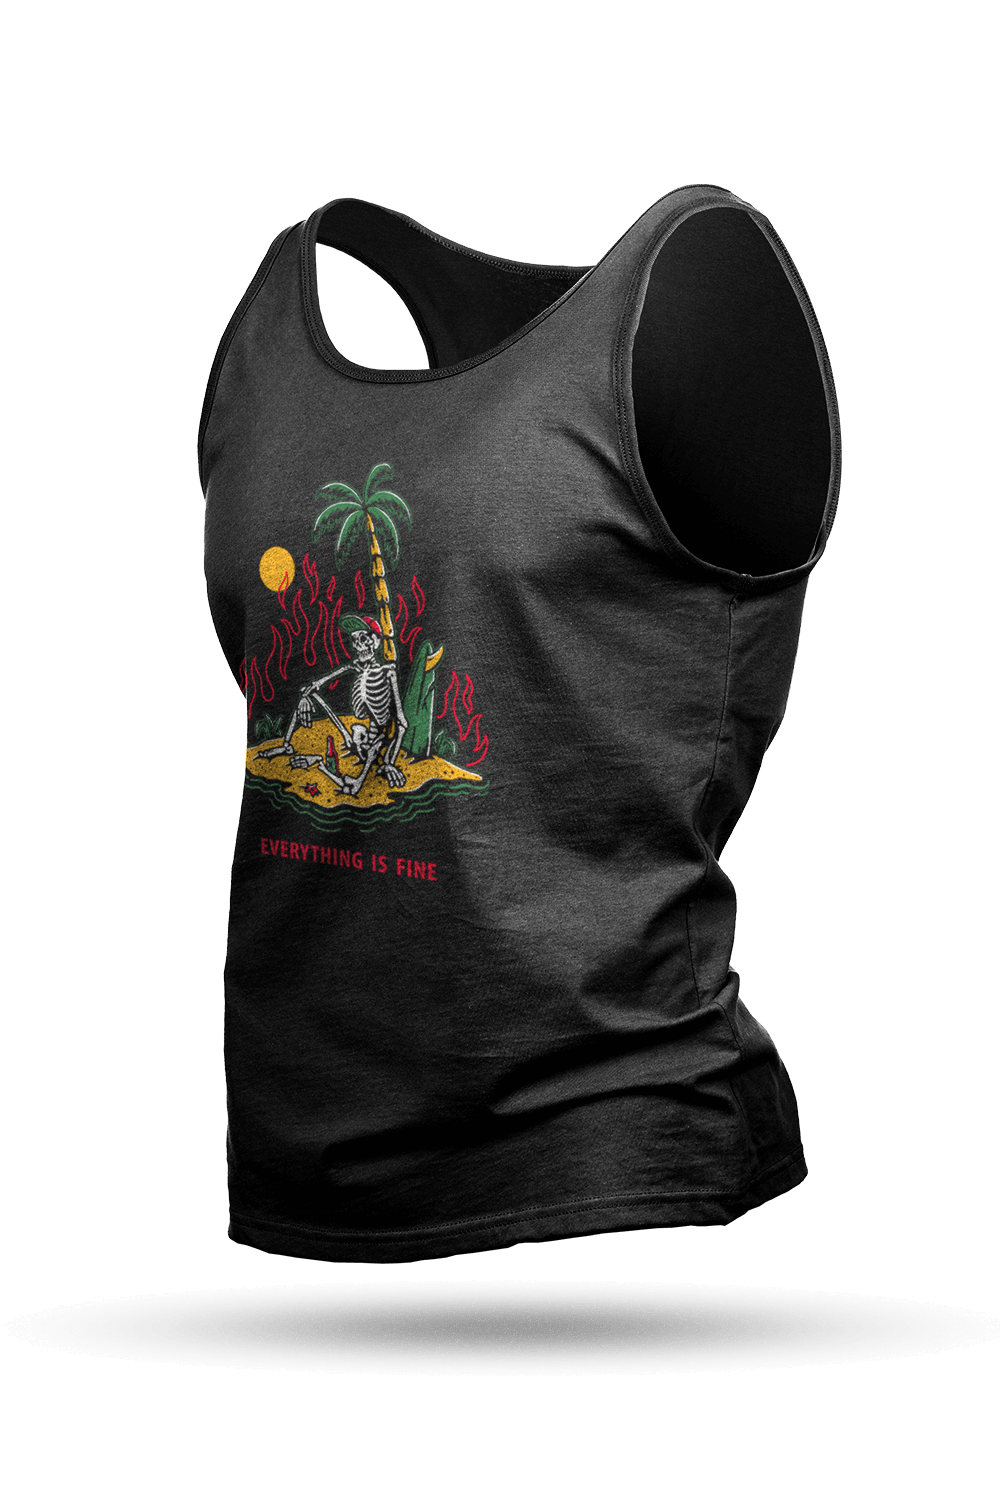 Men's Tank Top - Everything Is Fine